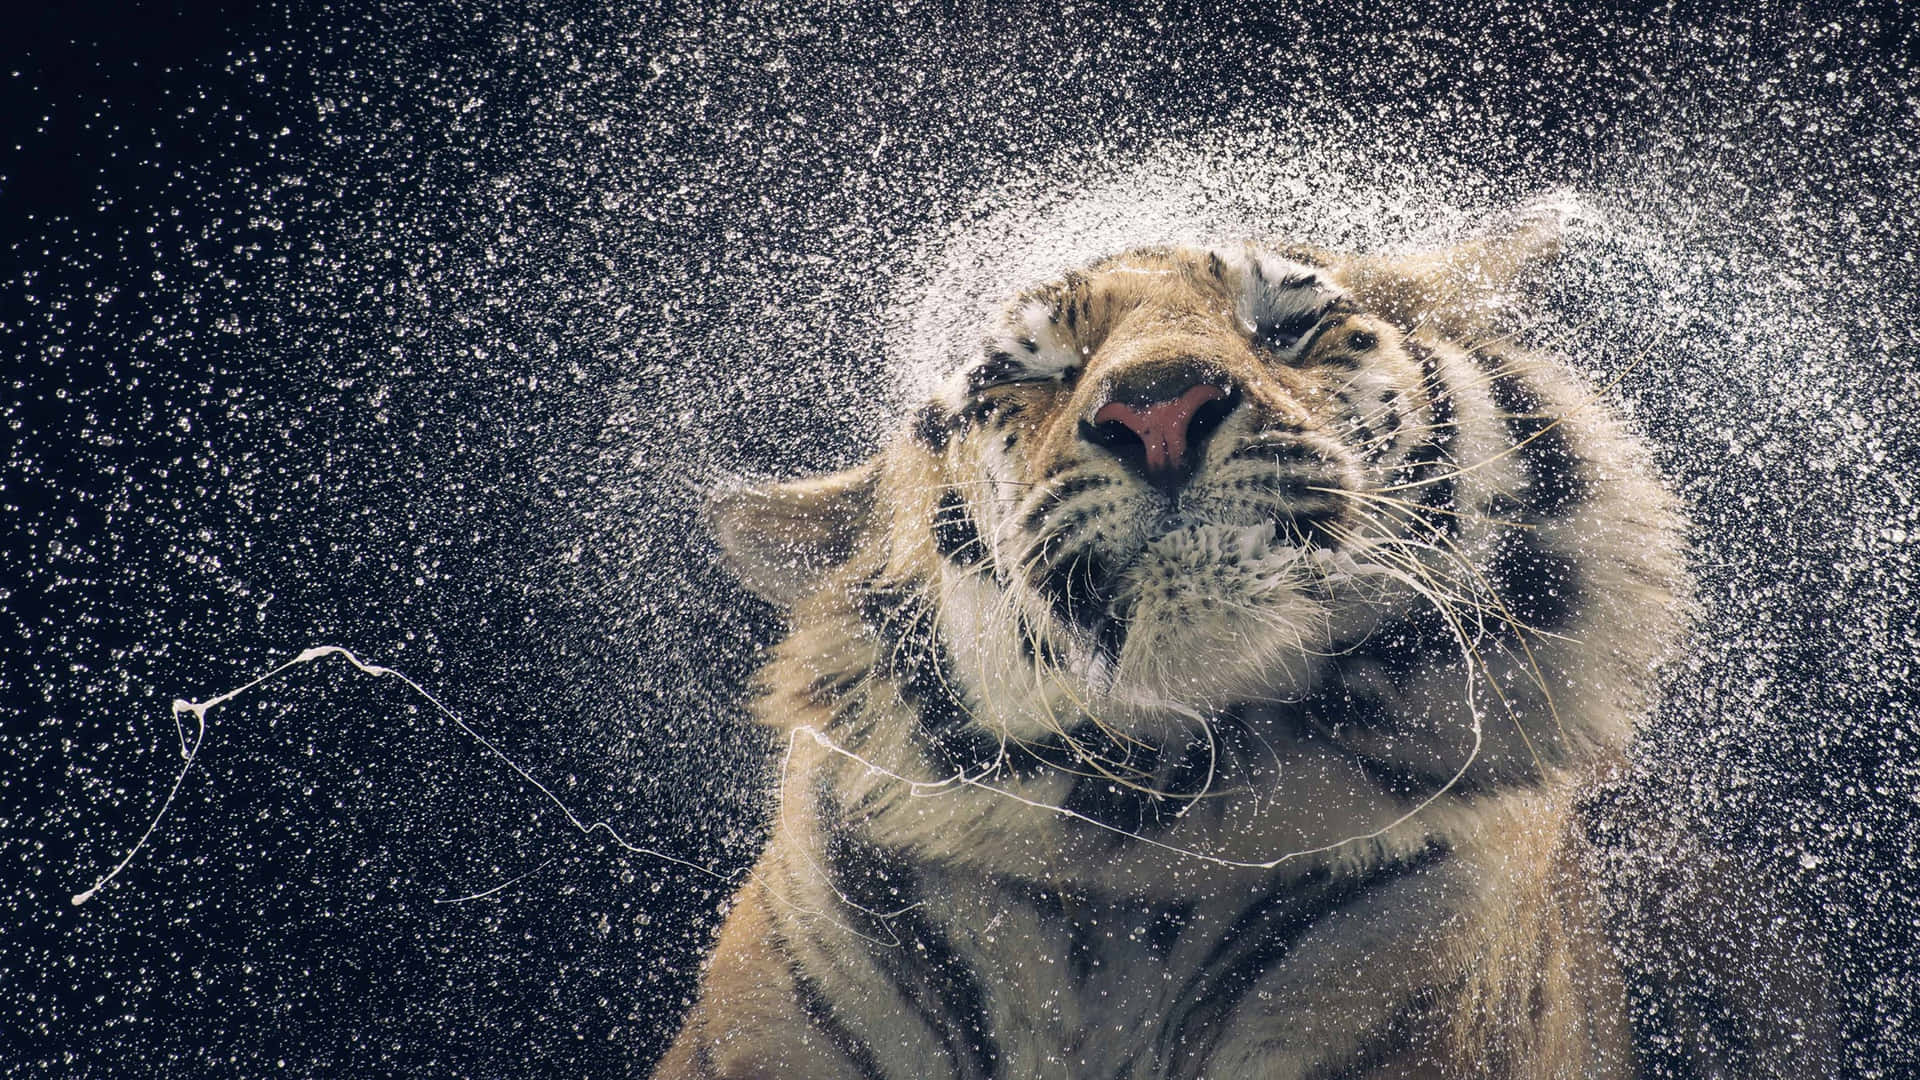 A Tiger Is Being Sprayed With Water